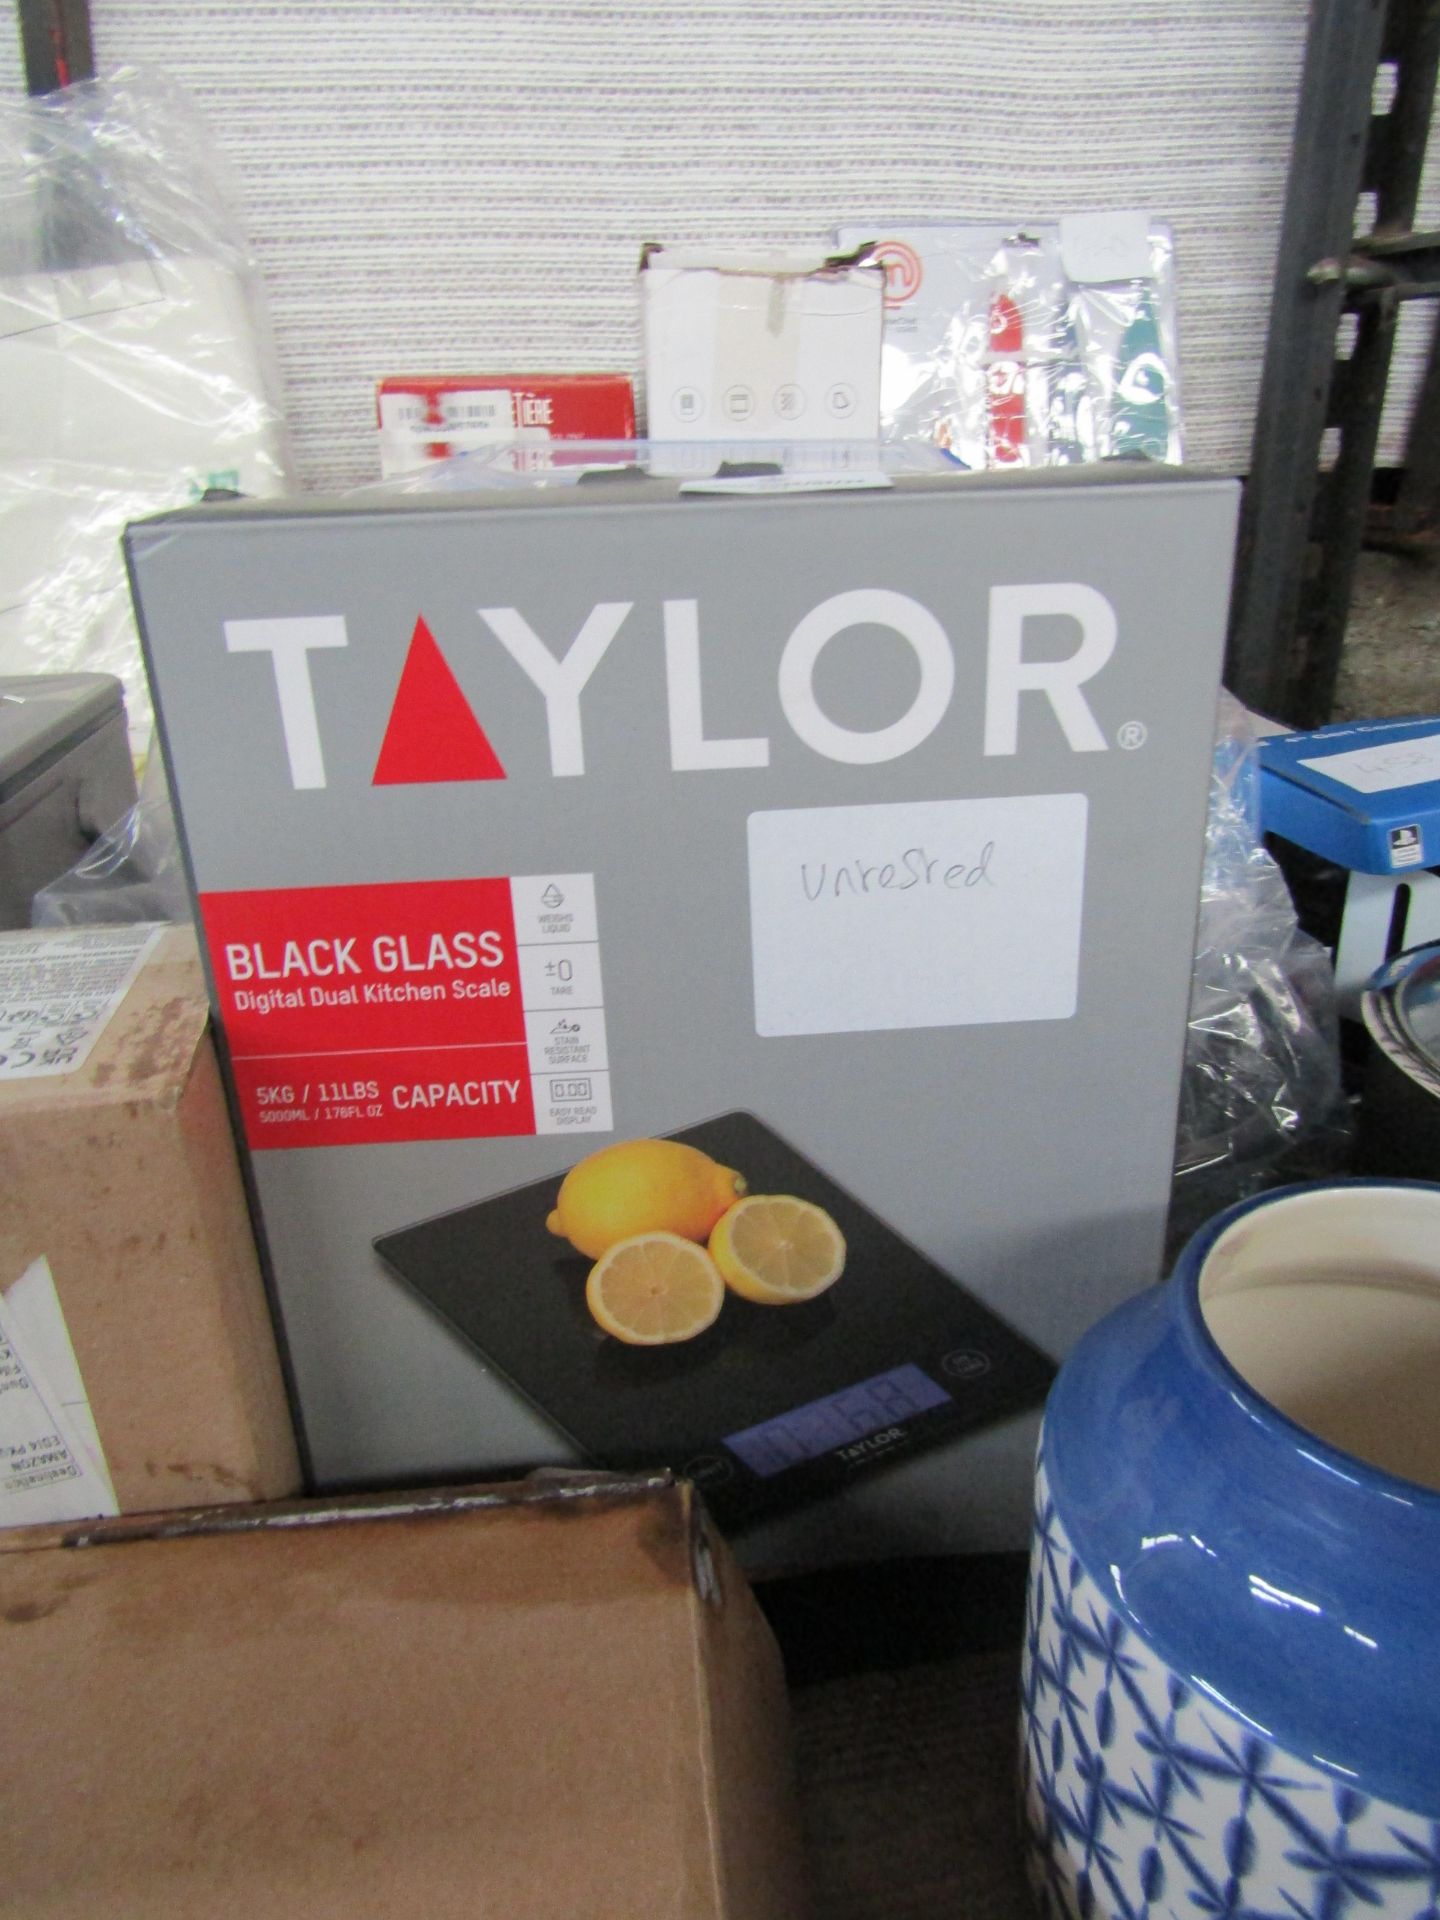 Taylor Digital Dual Kitchen Scale, 5kg Capacity - Untested & Boxed.